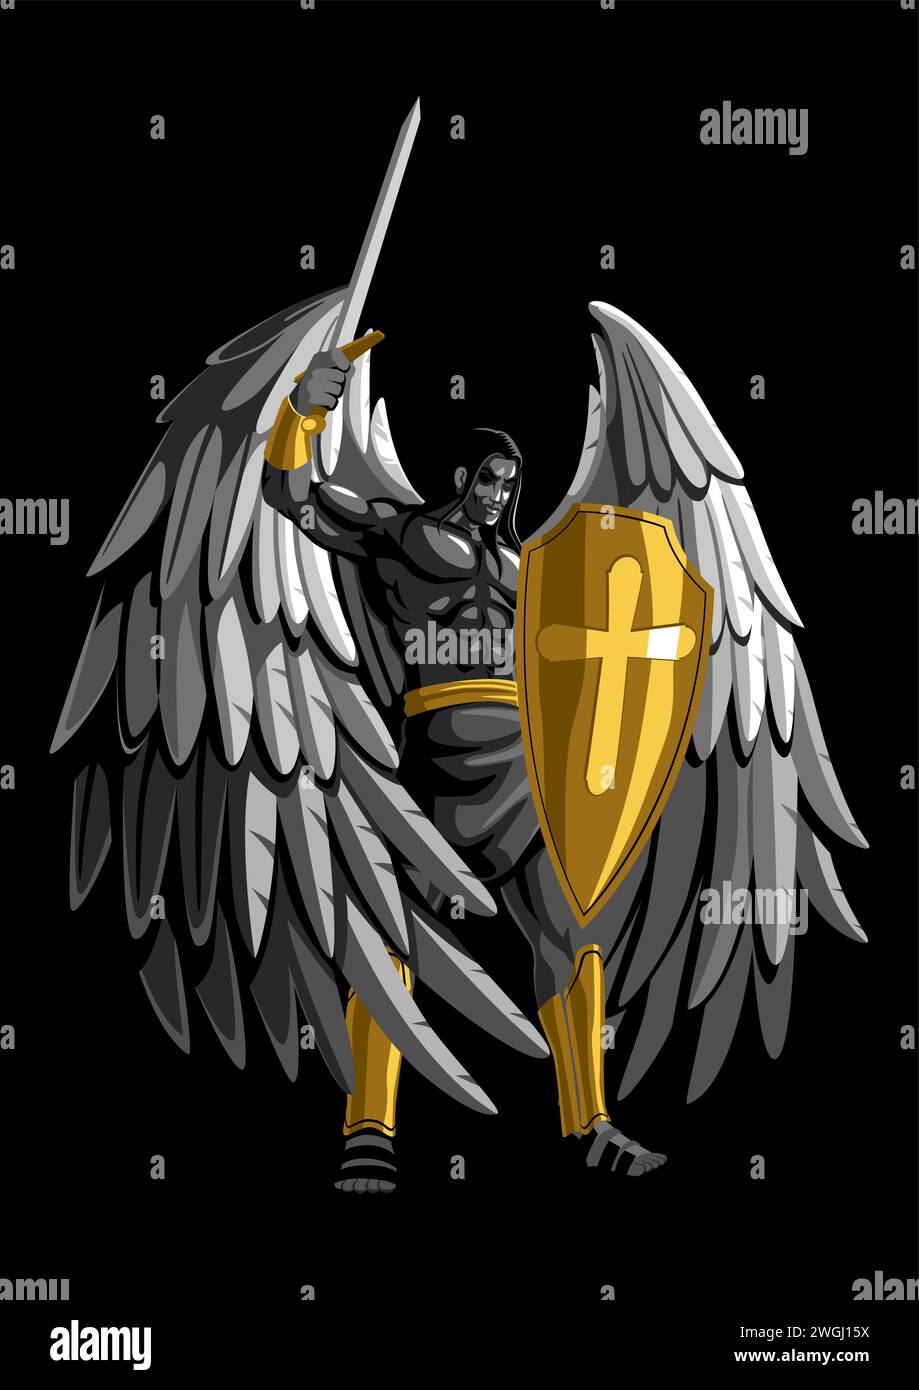 Archangel with sword and shield on black background Stock Vector